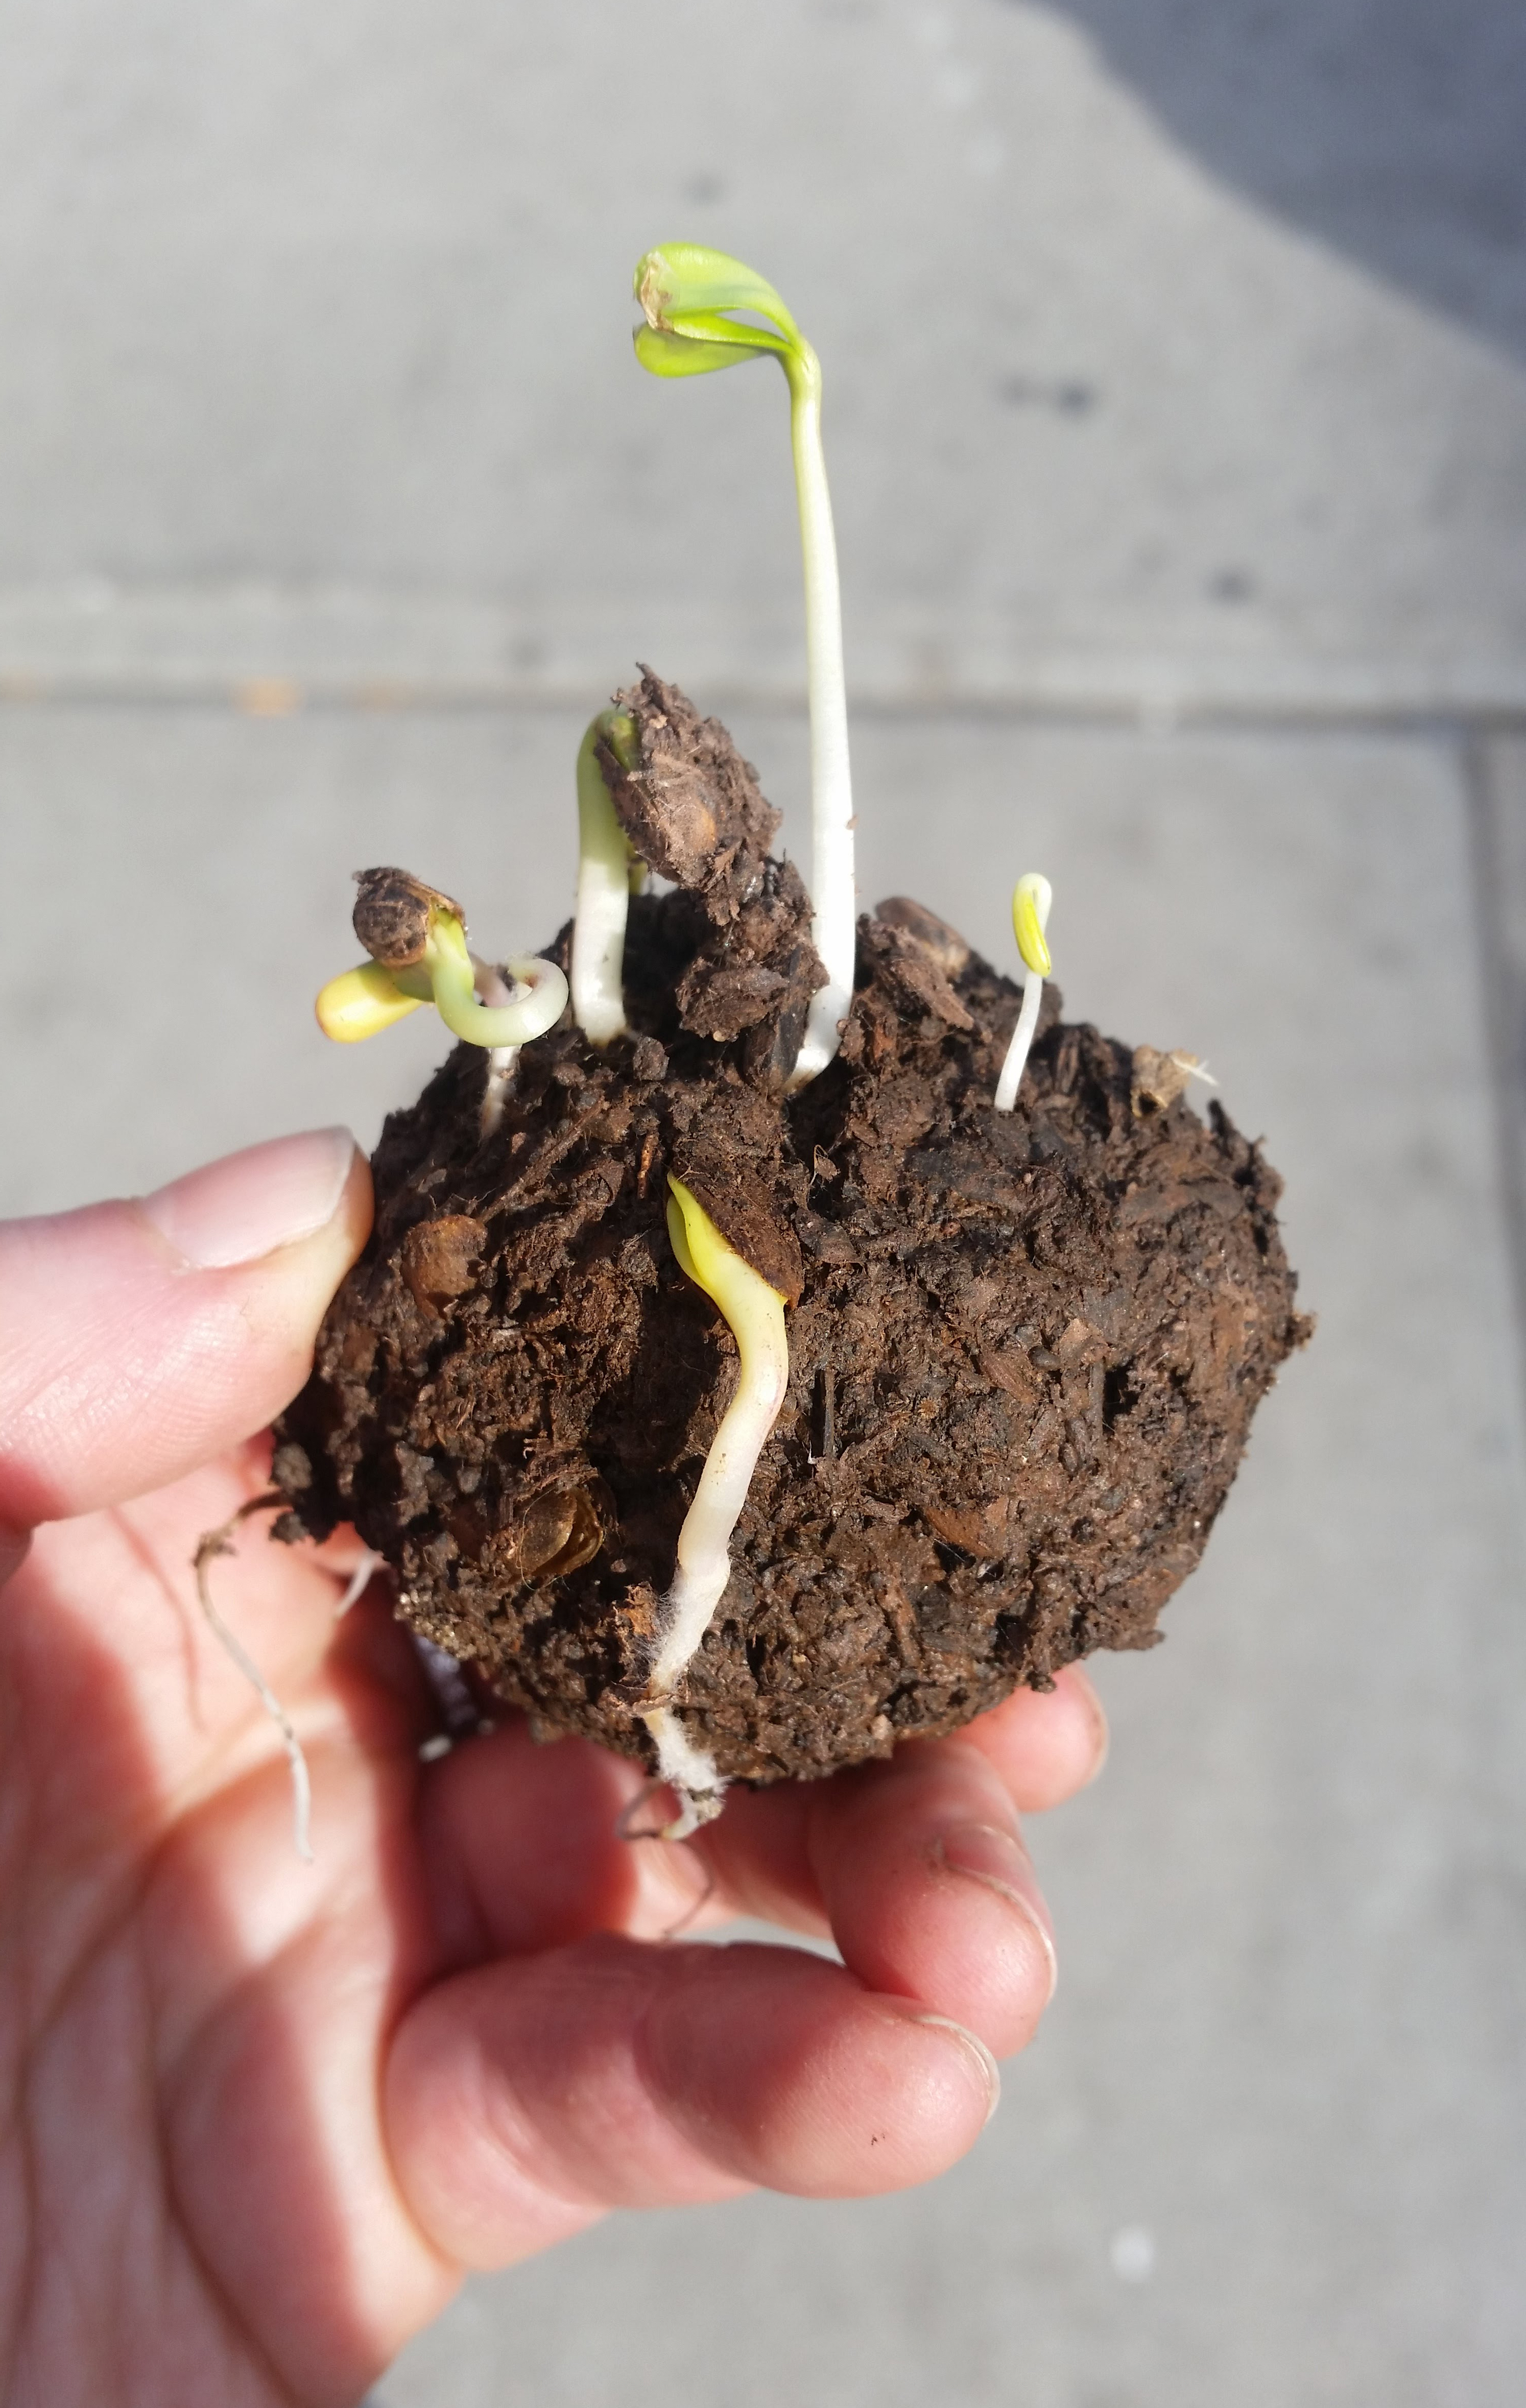 A "seed bomb" growing tiny green sprouts